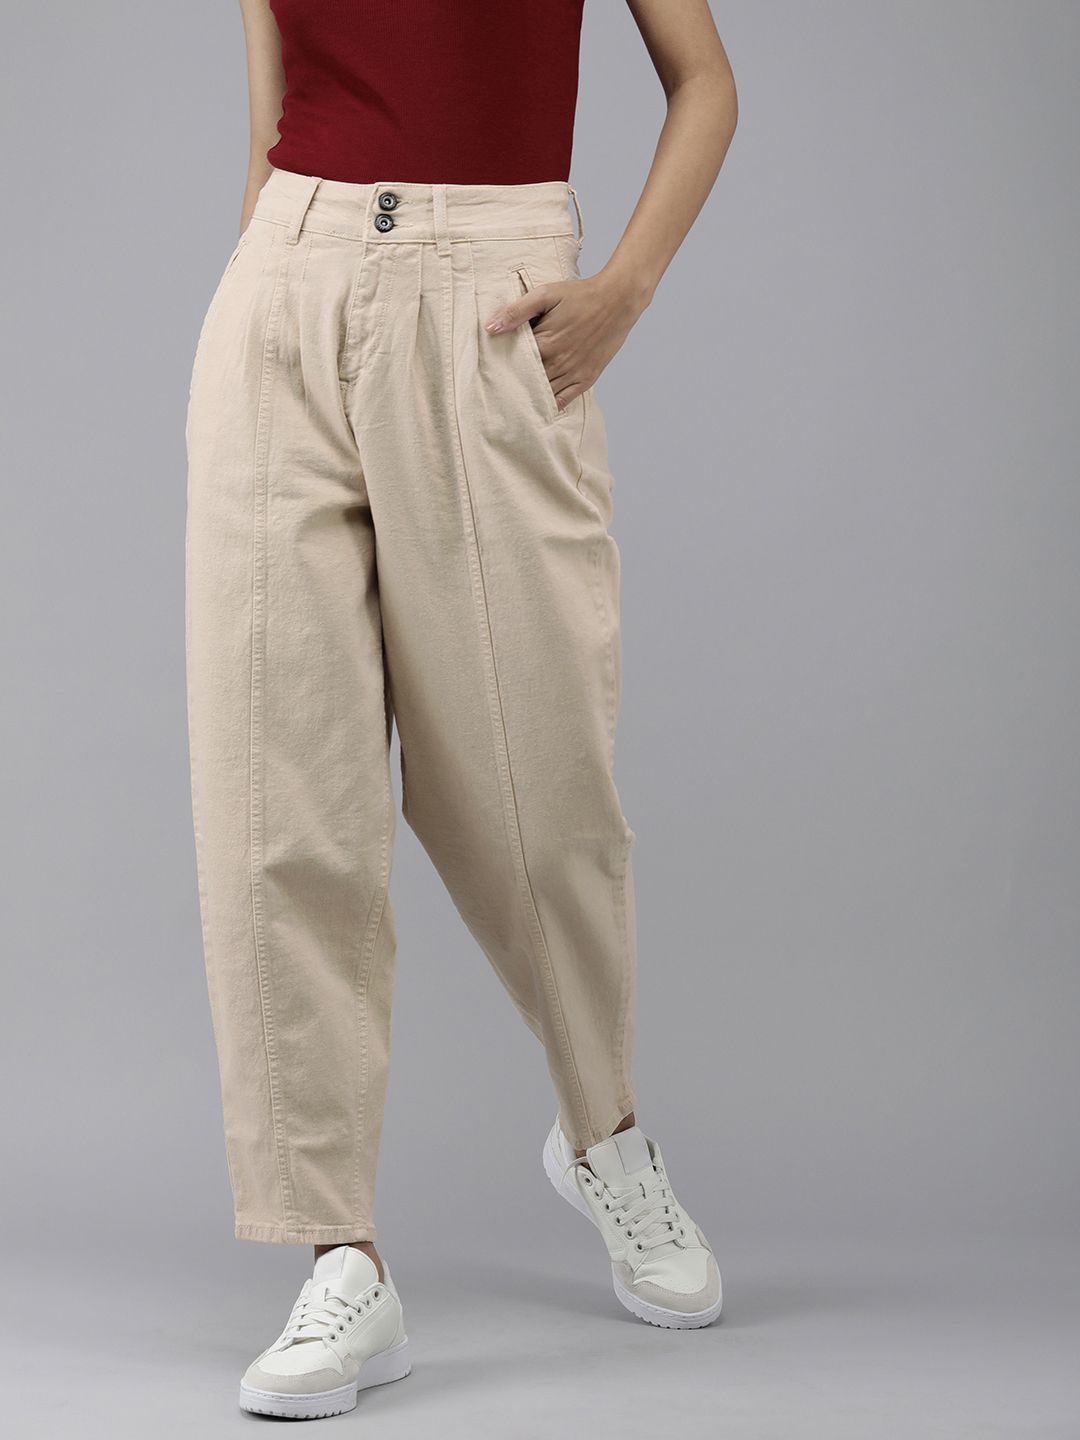 The Roadster Lifestyle Co Women Cream-Coloured Slouchy Fit High-Rise Stretchable Jeans Price in India